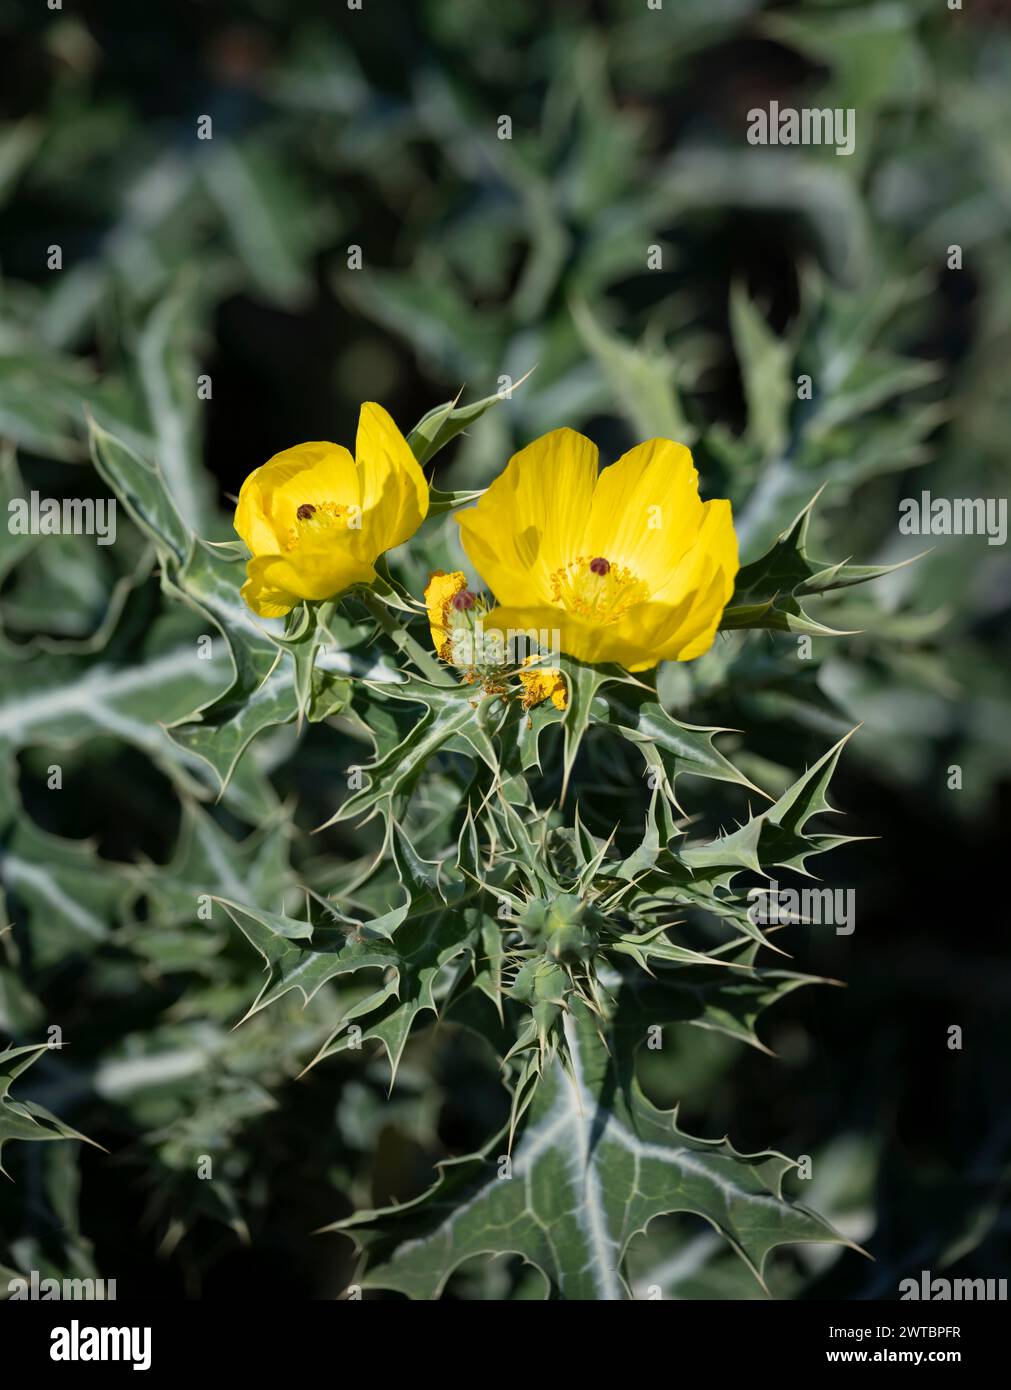 Yellow flower on spiny plant, Mexican spiked poppy (Argemone mexicana), Krugegr National Park, South Africa Stock Photo